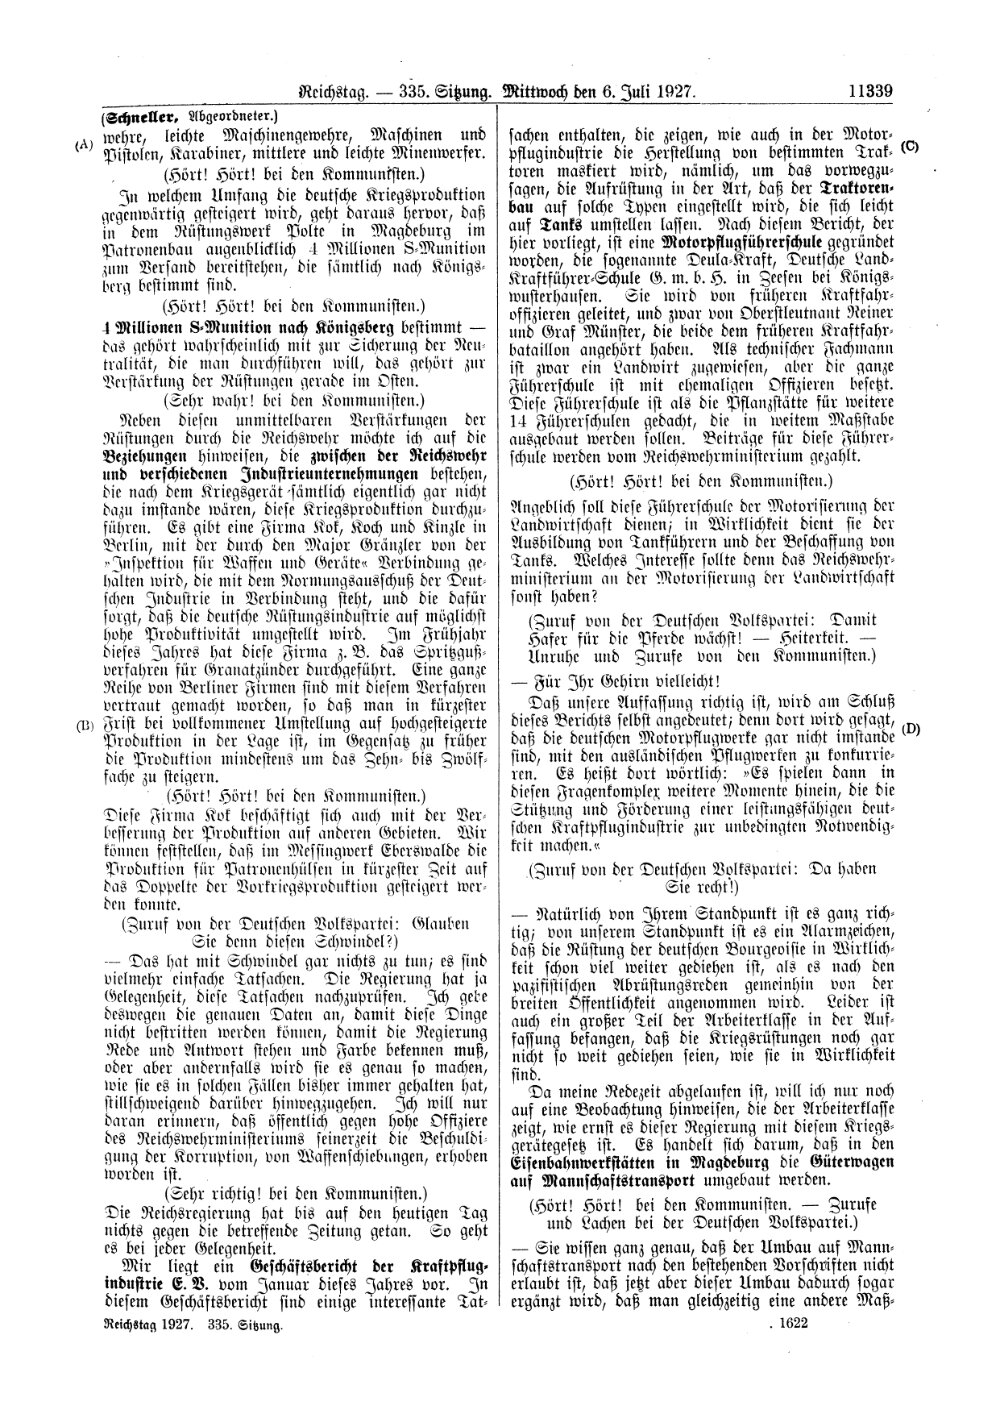 Scan of page 11339